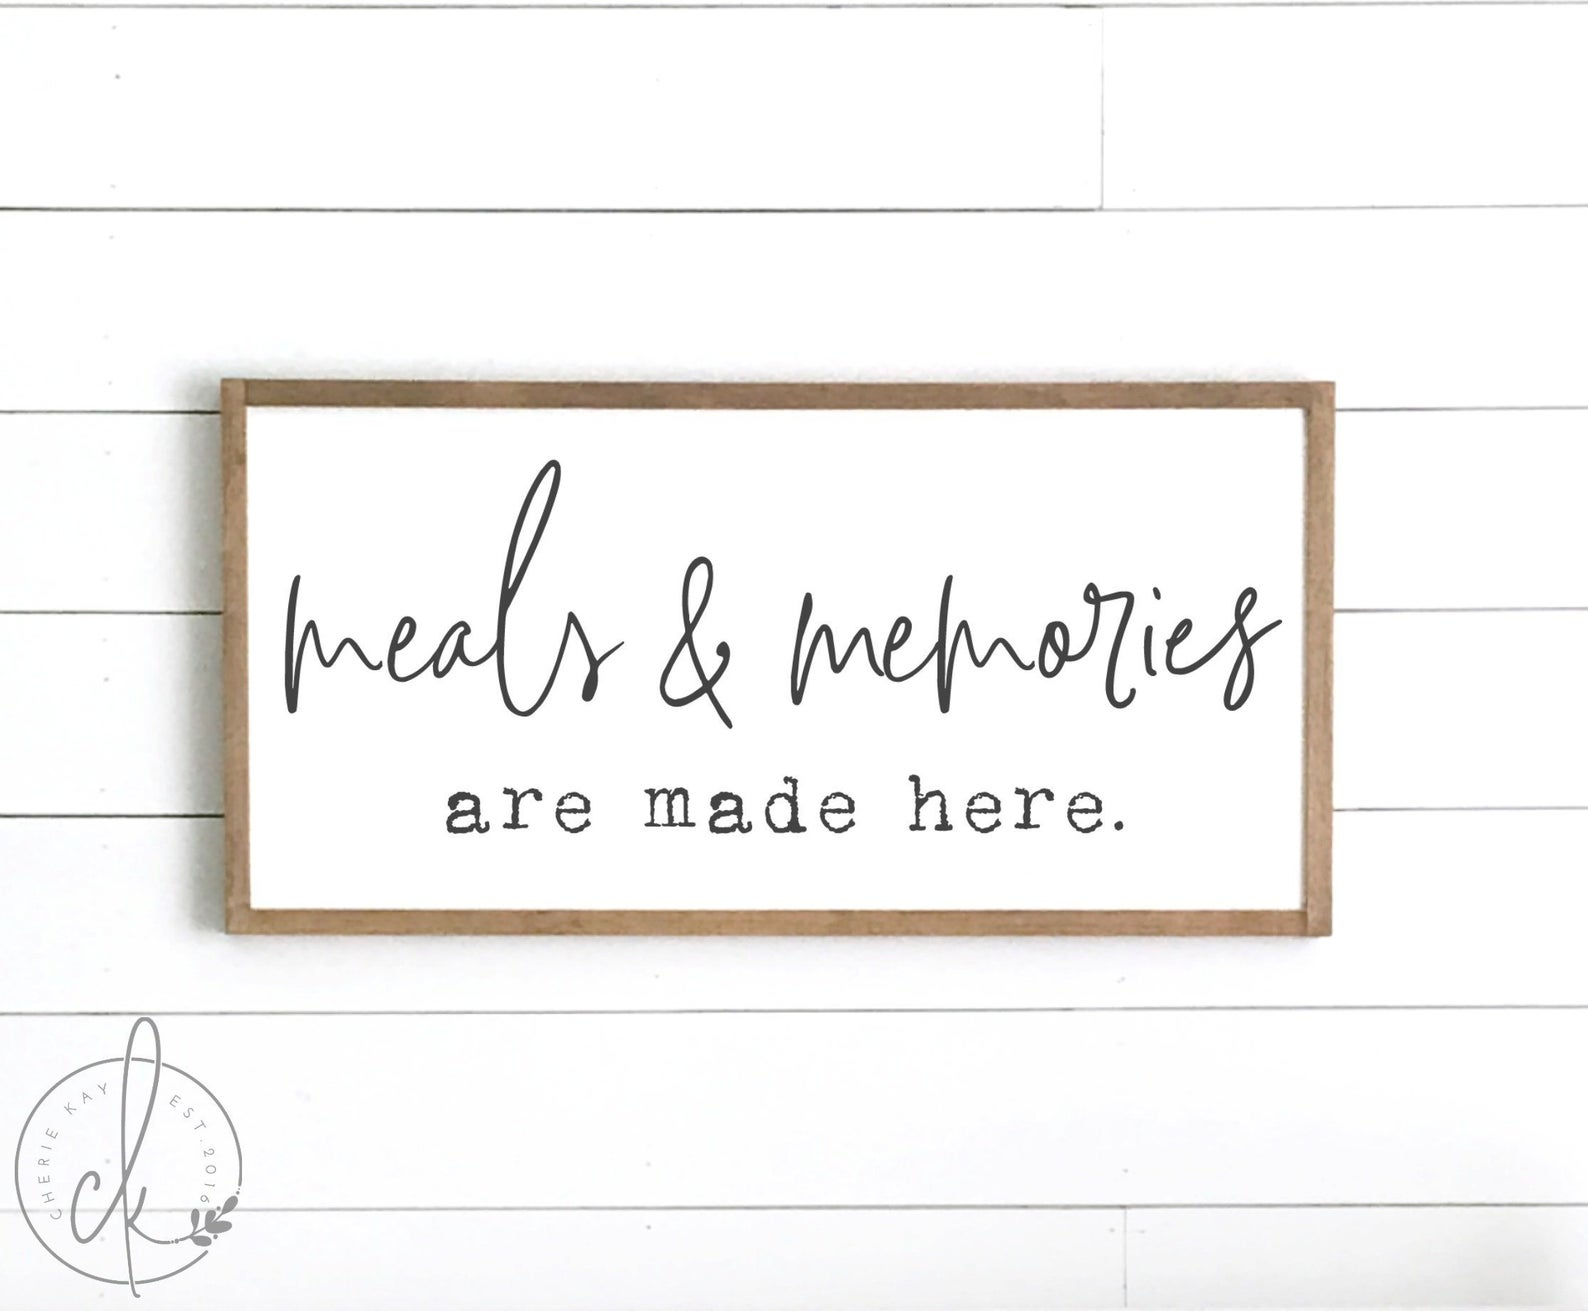 kitchen sign | meals & memories are made here | wood sign | kitchen wall decor | farmhouse sign | farmhouse kitchen decor - kitchen sign | meals & memories are made here | wood sign | kitchen wall decor | farmhouse sign | farmhouse kitchen decor -   19 diy House kitchen ideas